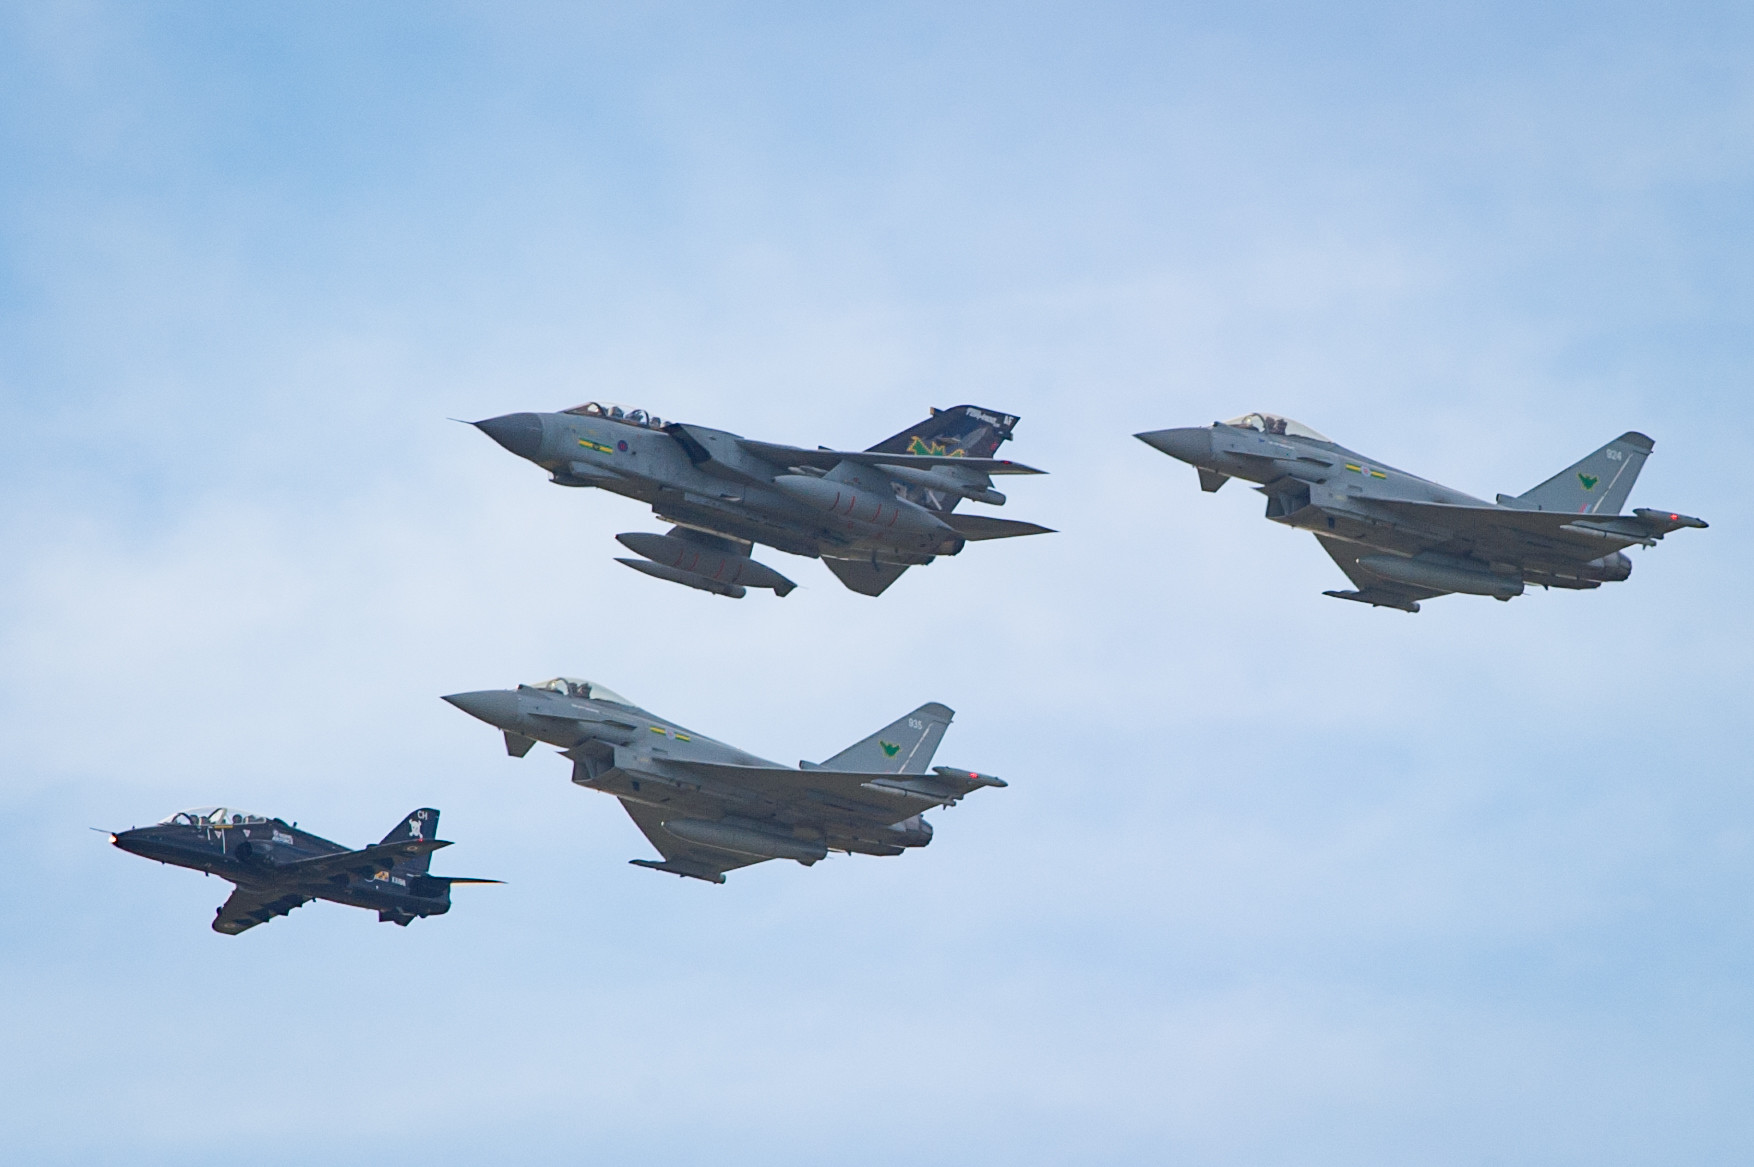 Tornados make a final fly pass RAF Lossiemouth accompanied by Typhoons and a trainer craft.